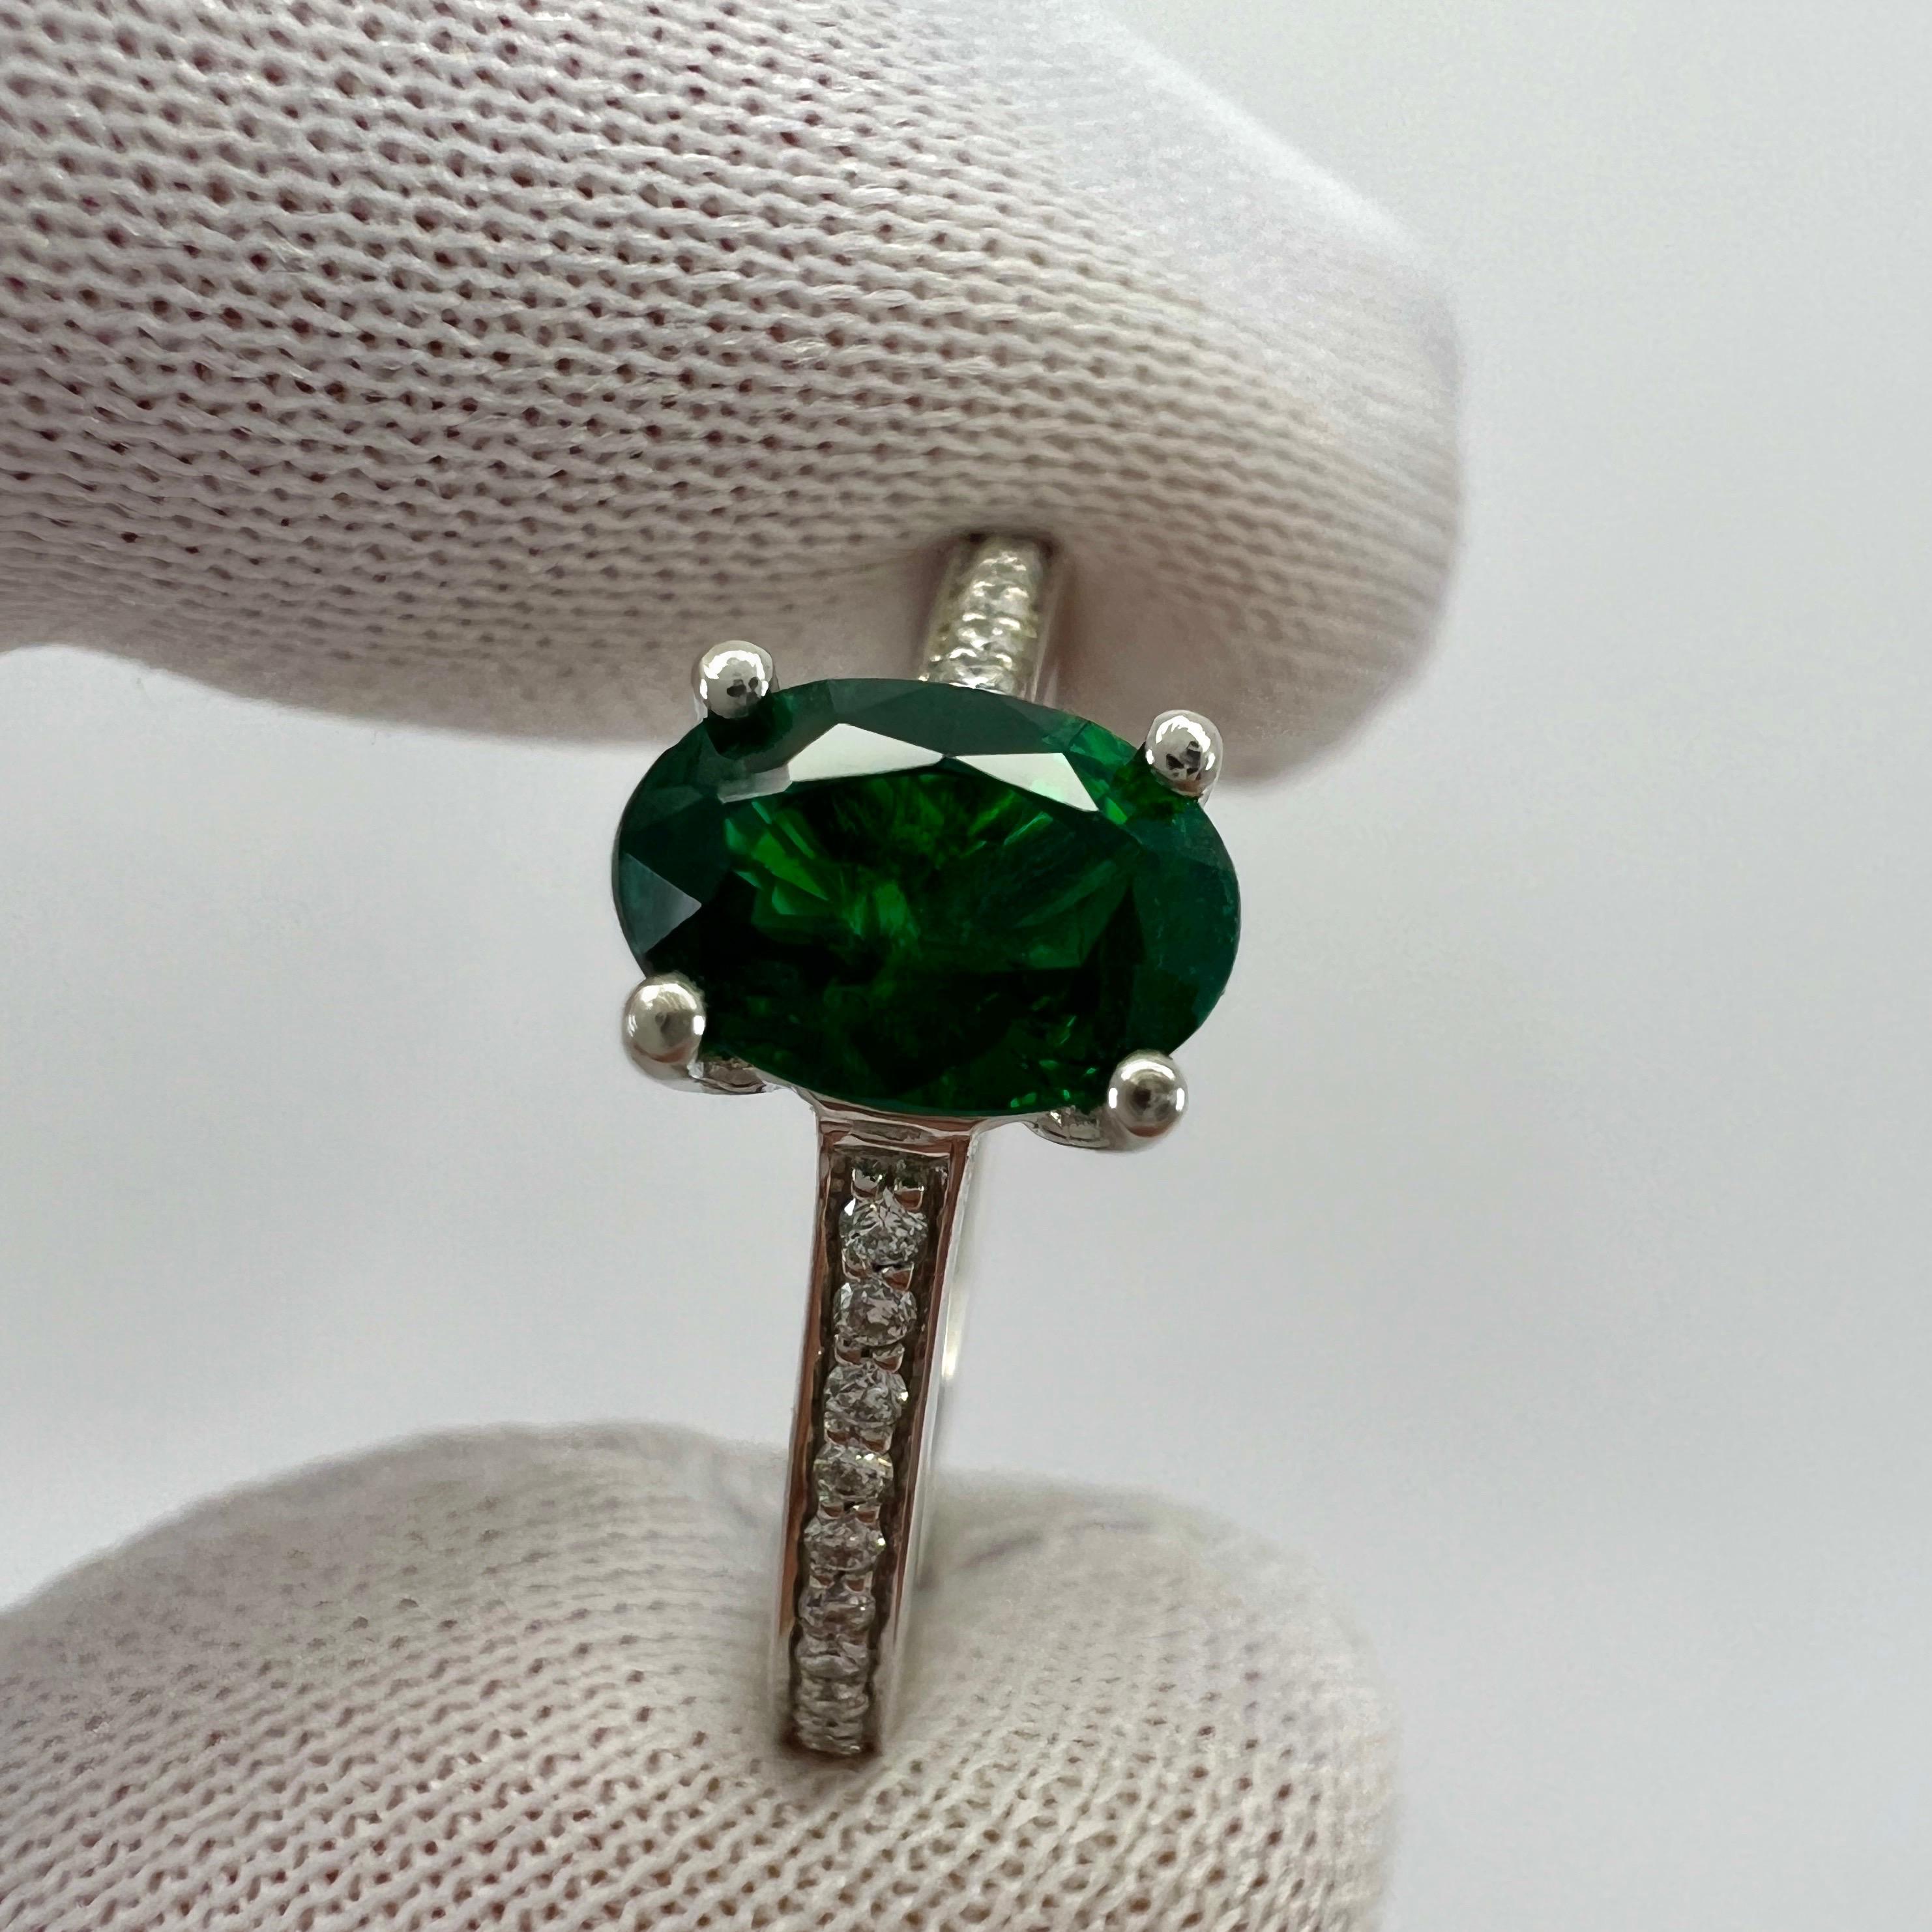 Fine Deep Green Oval Cut Natural Emerald & Diamond Platinum Solitaire Ring. 1.00 Total carat weight.

Stunning 0.88 carat emerald with a fine deep green colour and an excellent oval cut. Measuring just over 7x5mm.
The emerald has good clarity with